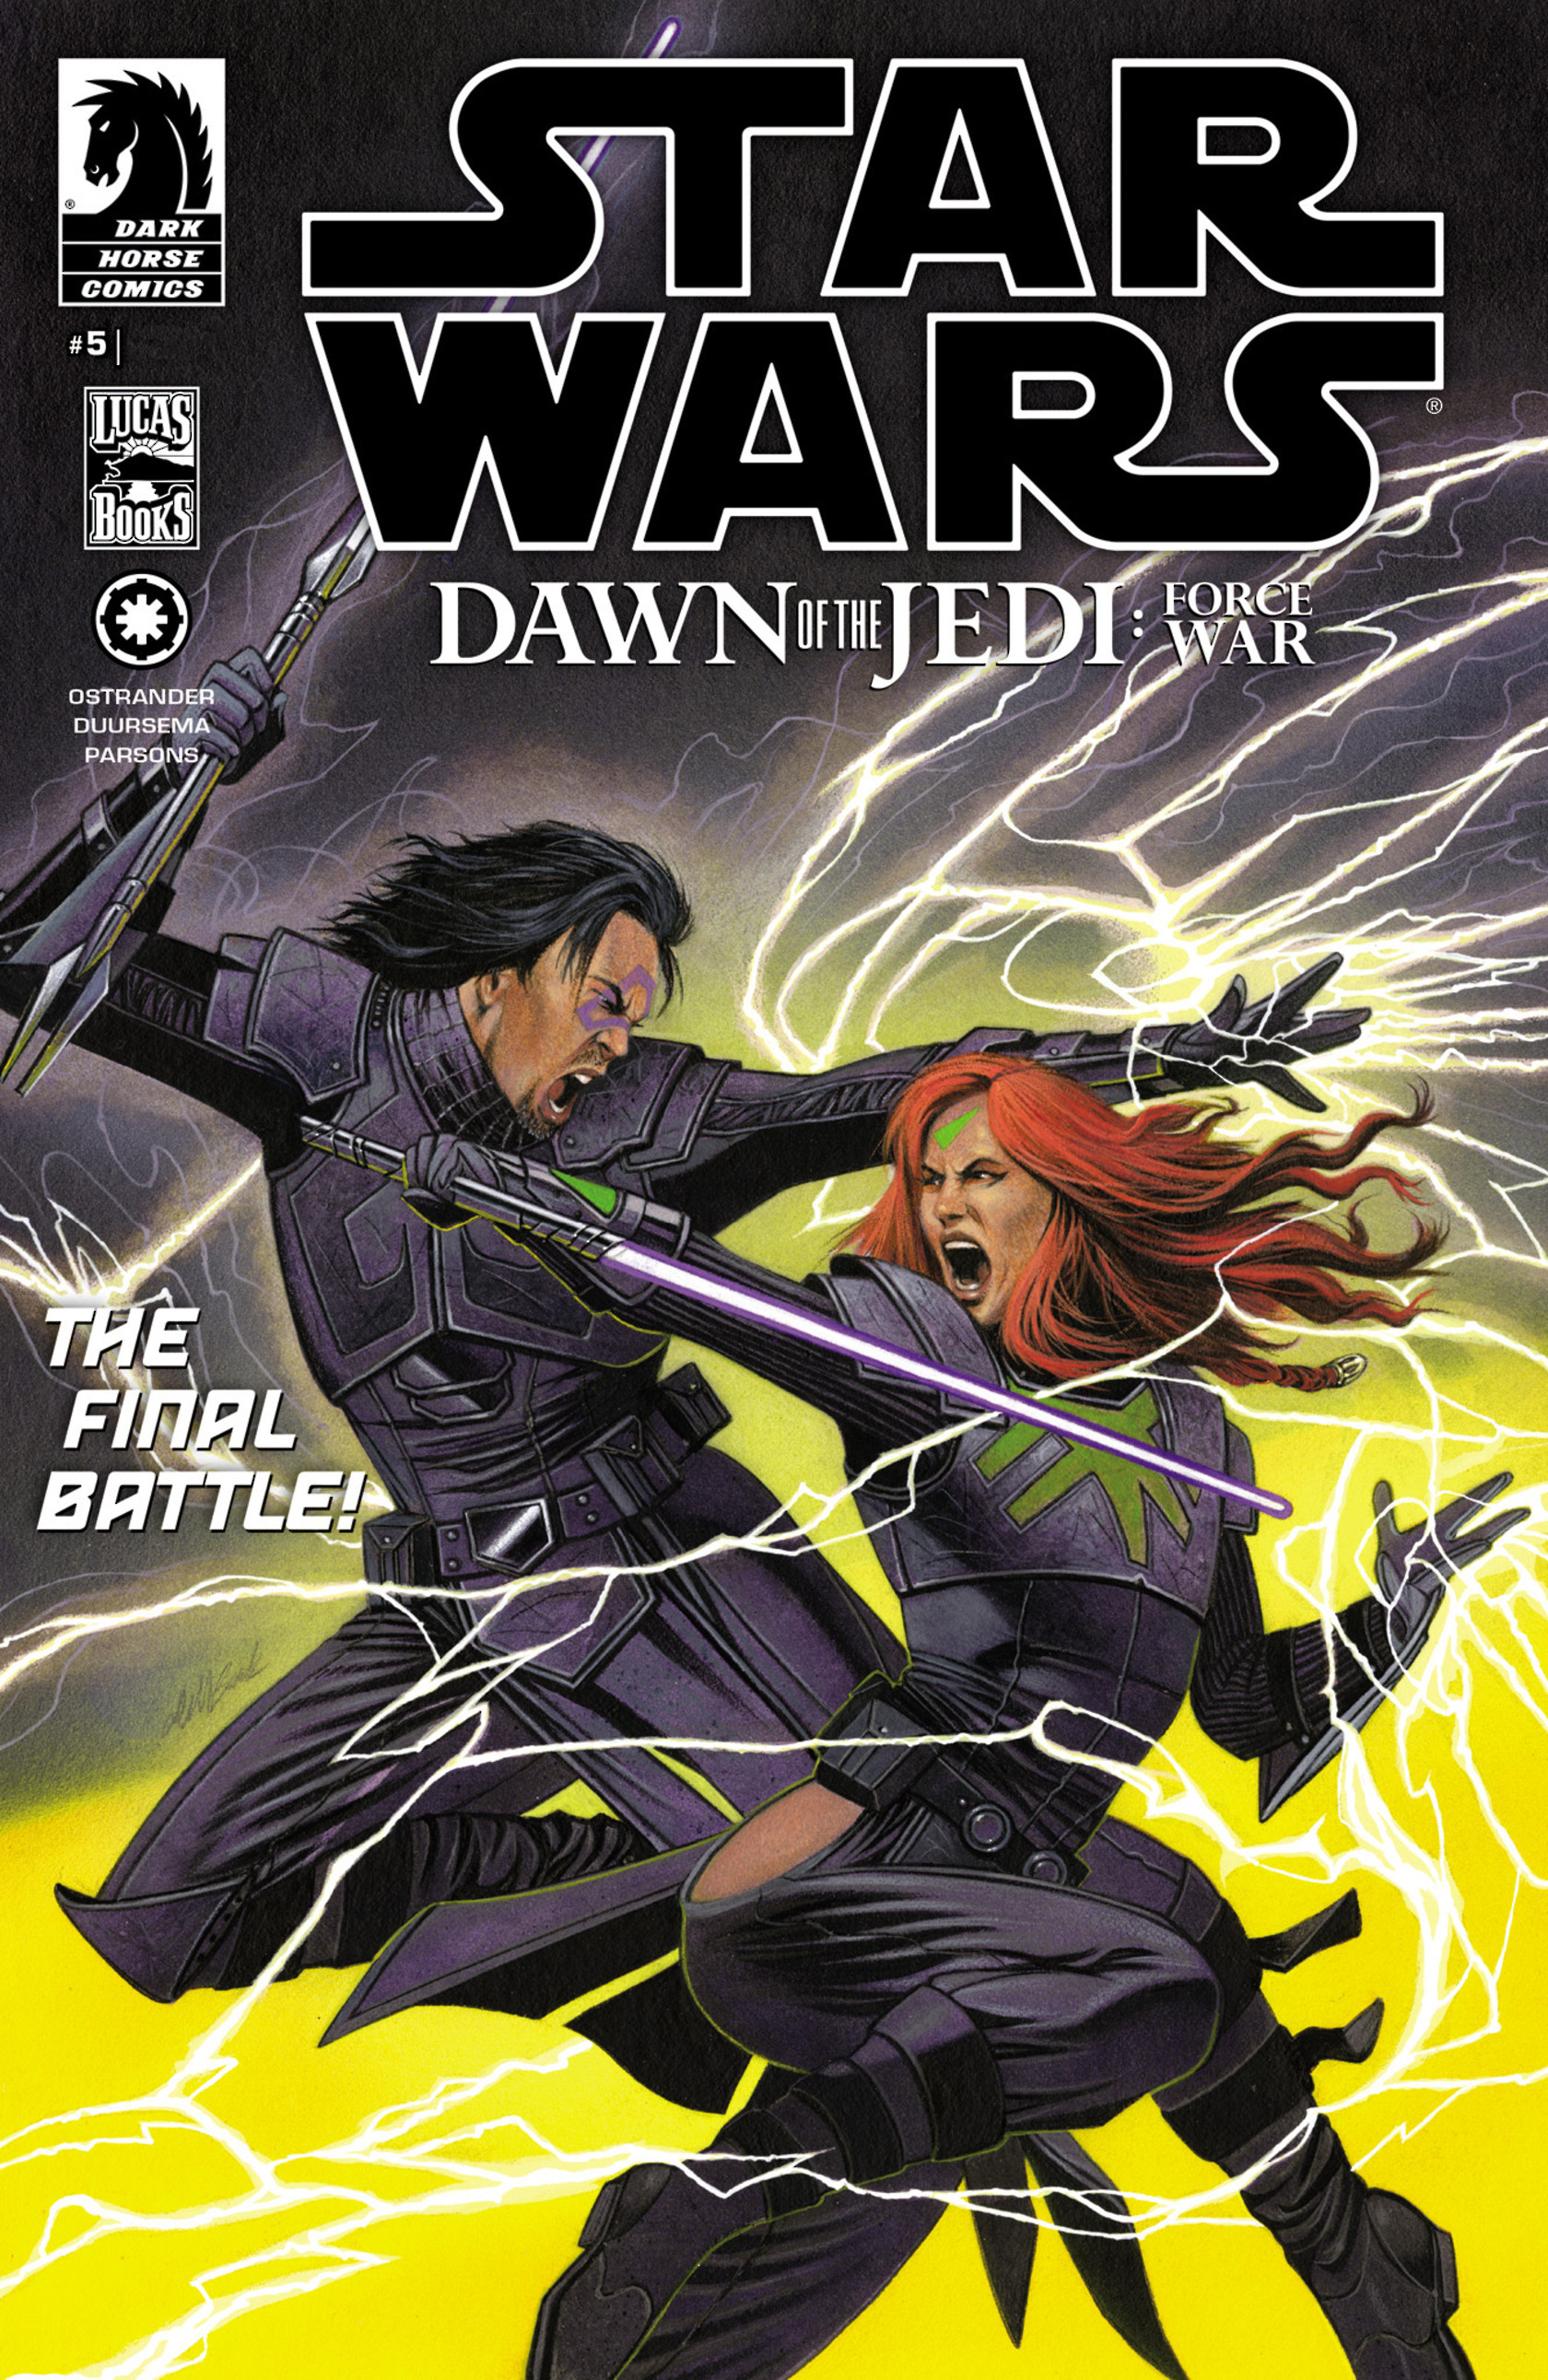 Star Wars: Dawn of the Jedi - Force War issue 5 - Page 1